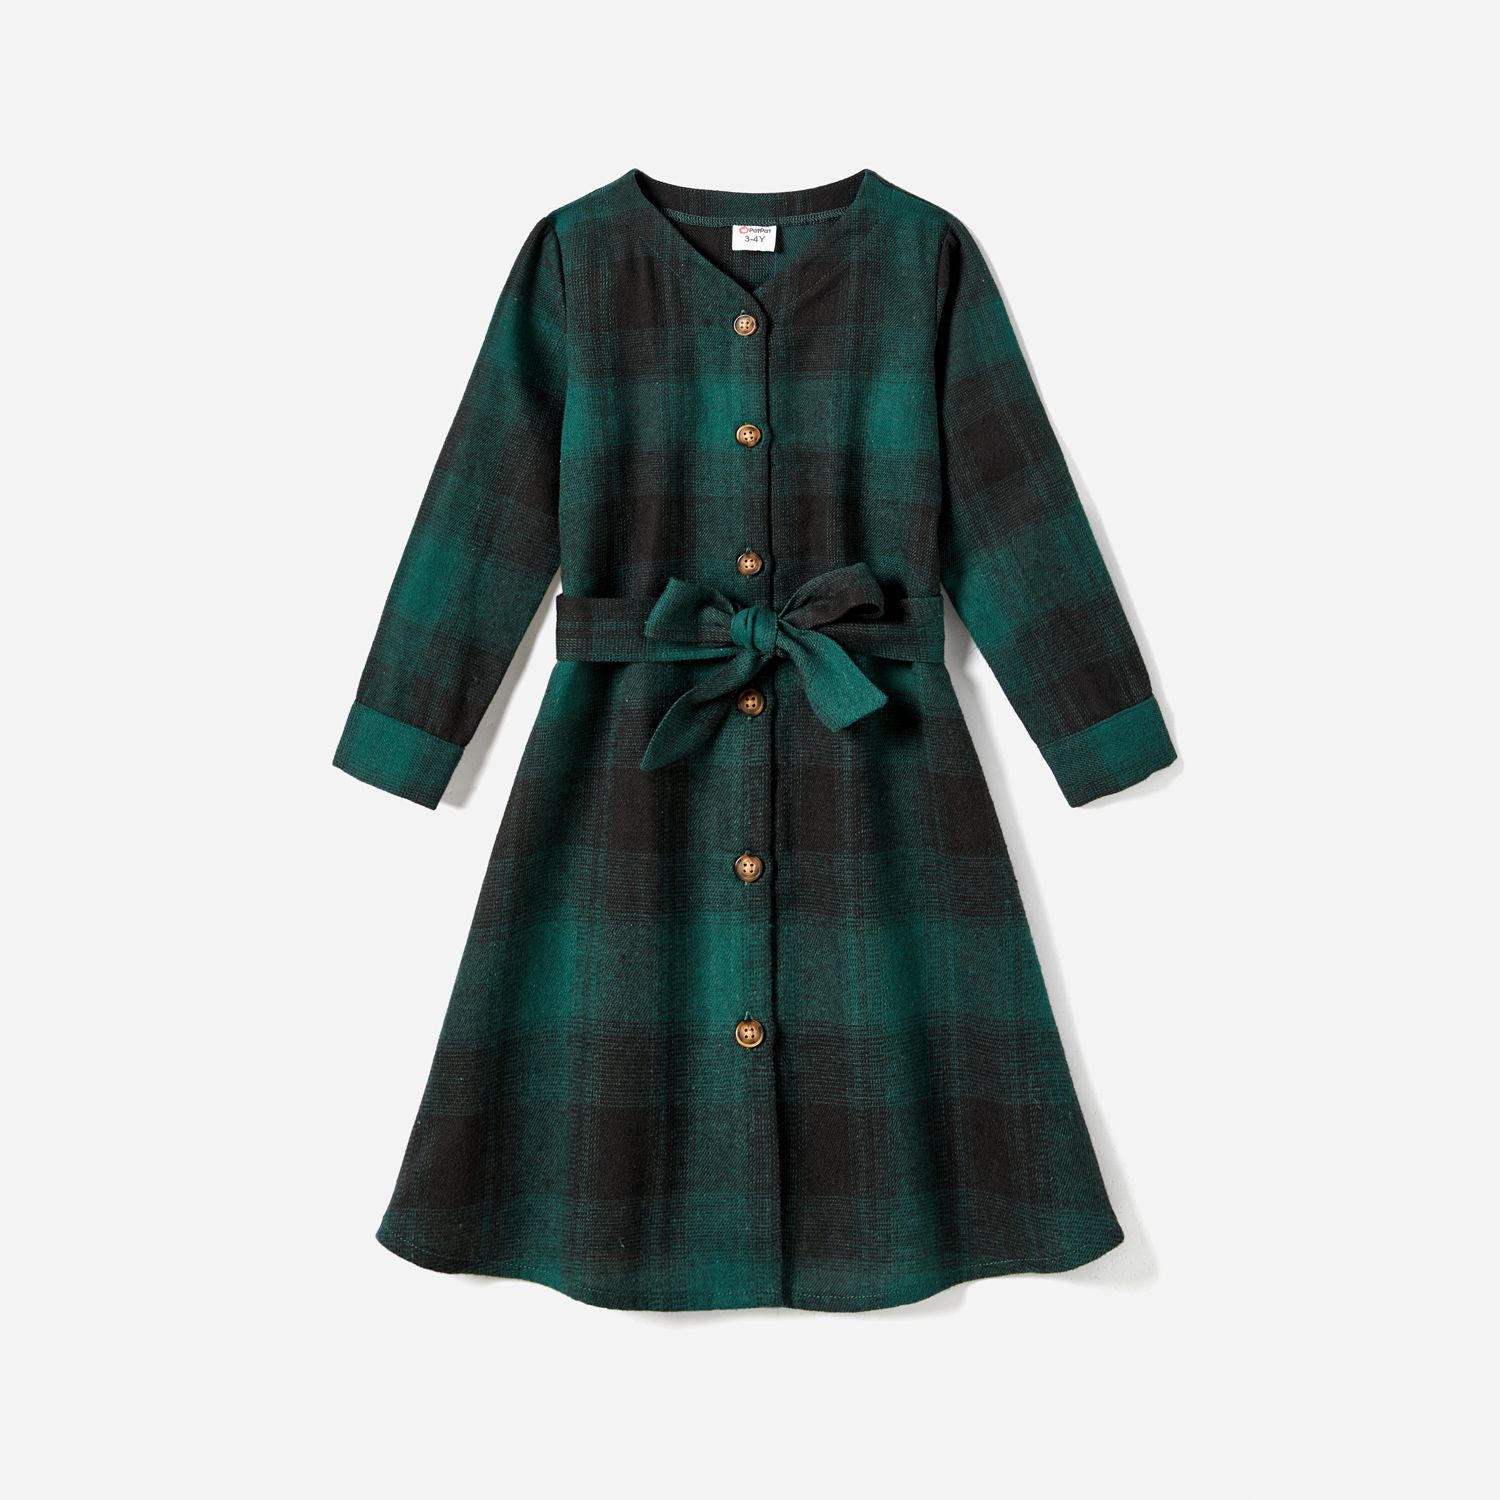 Family Matching Casual Plaid Long-sleeve Belted Dresses & Tops Sets